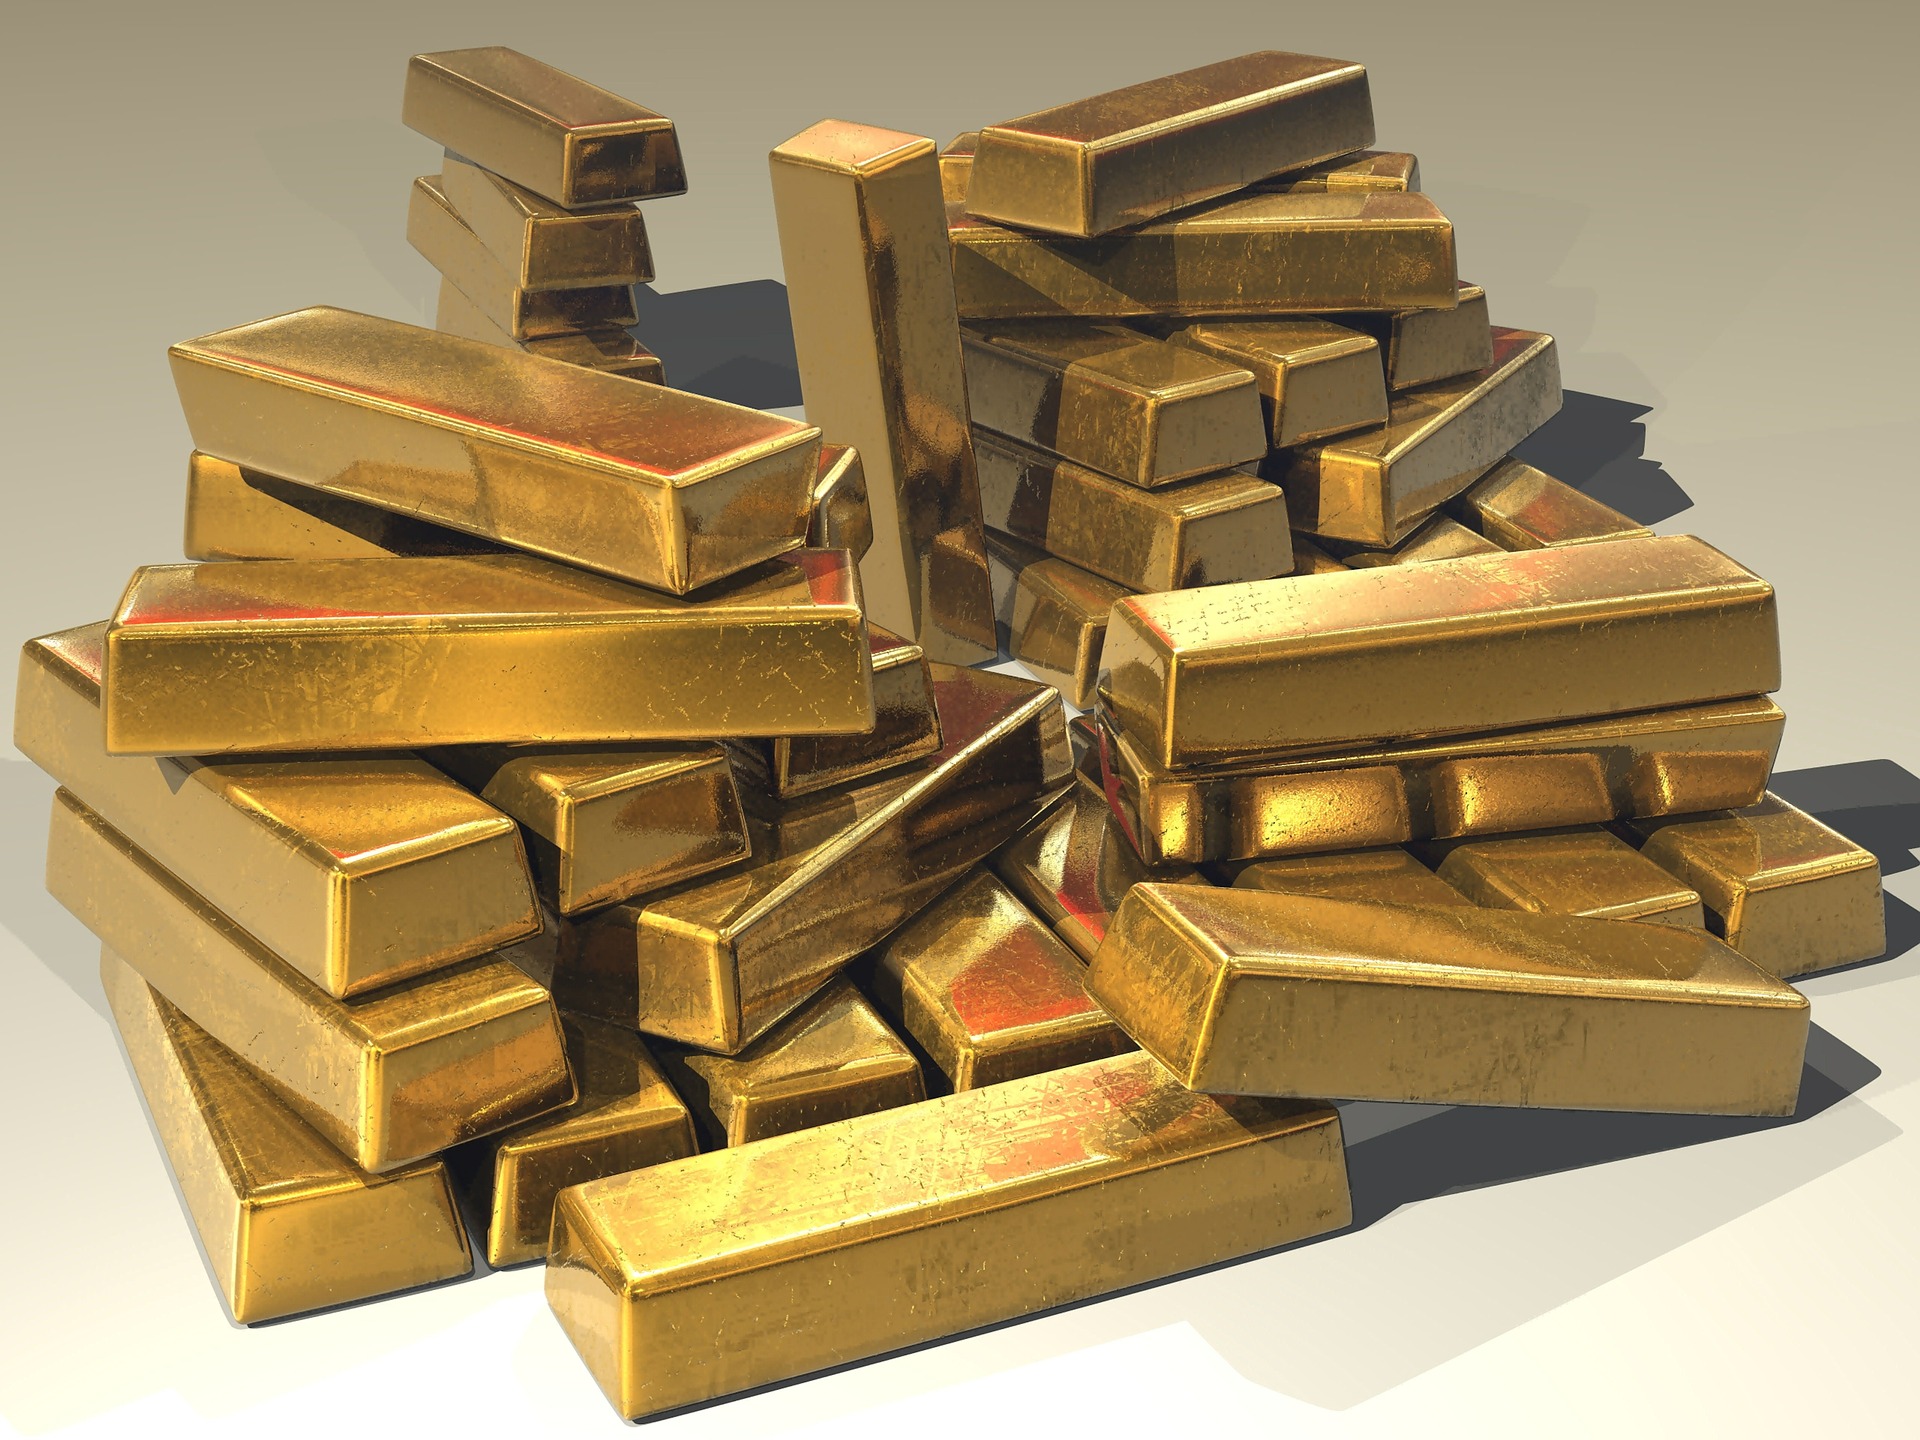 How To Convert A 401(k) To Gold Investment - Finance - Zacks